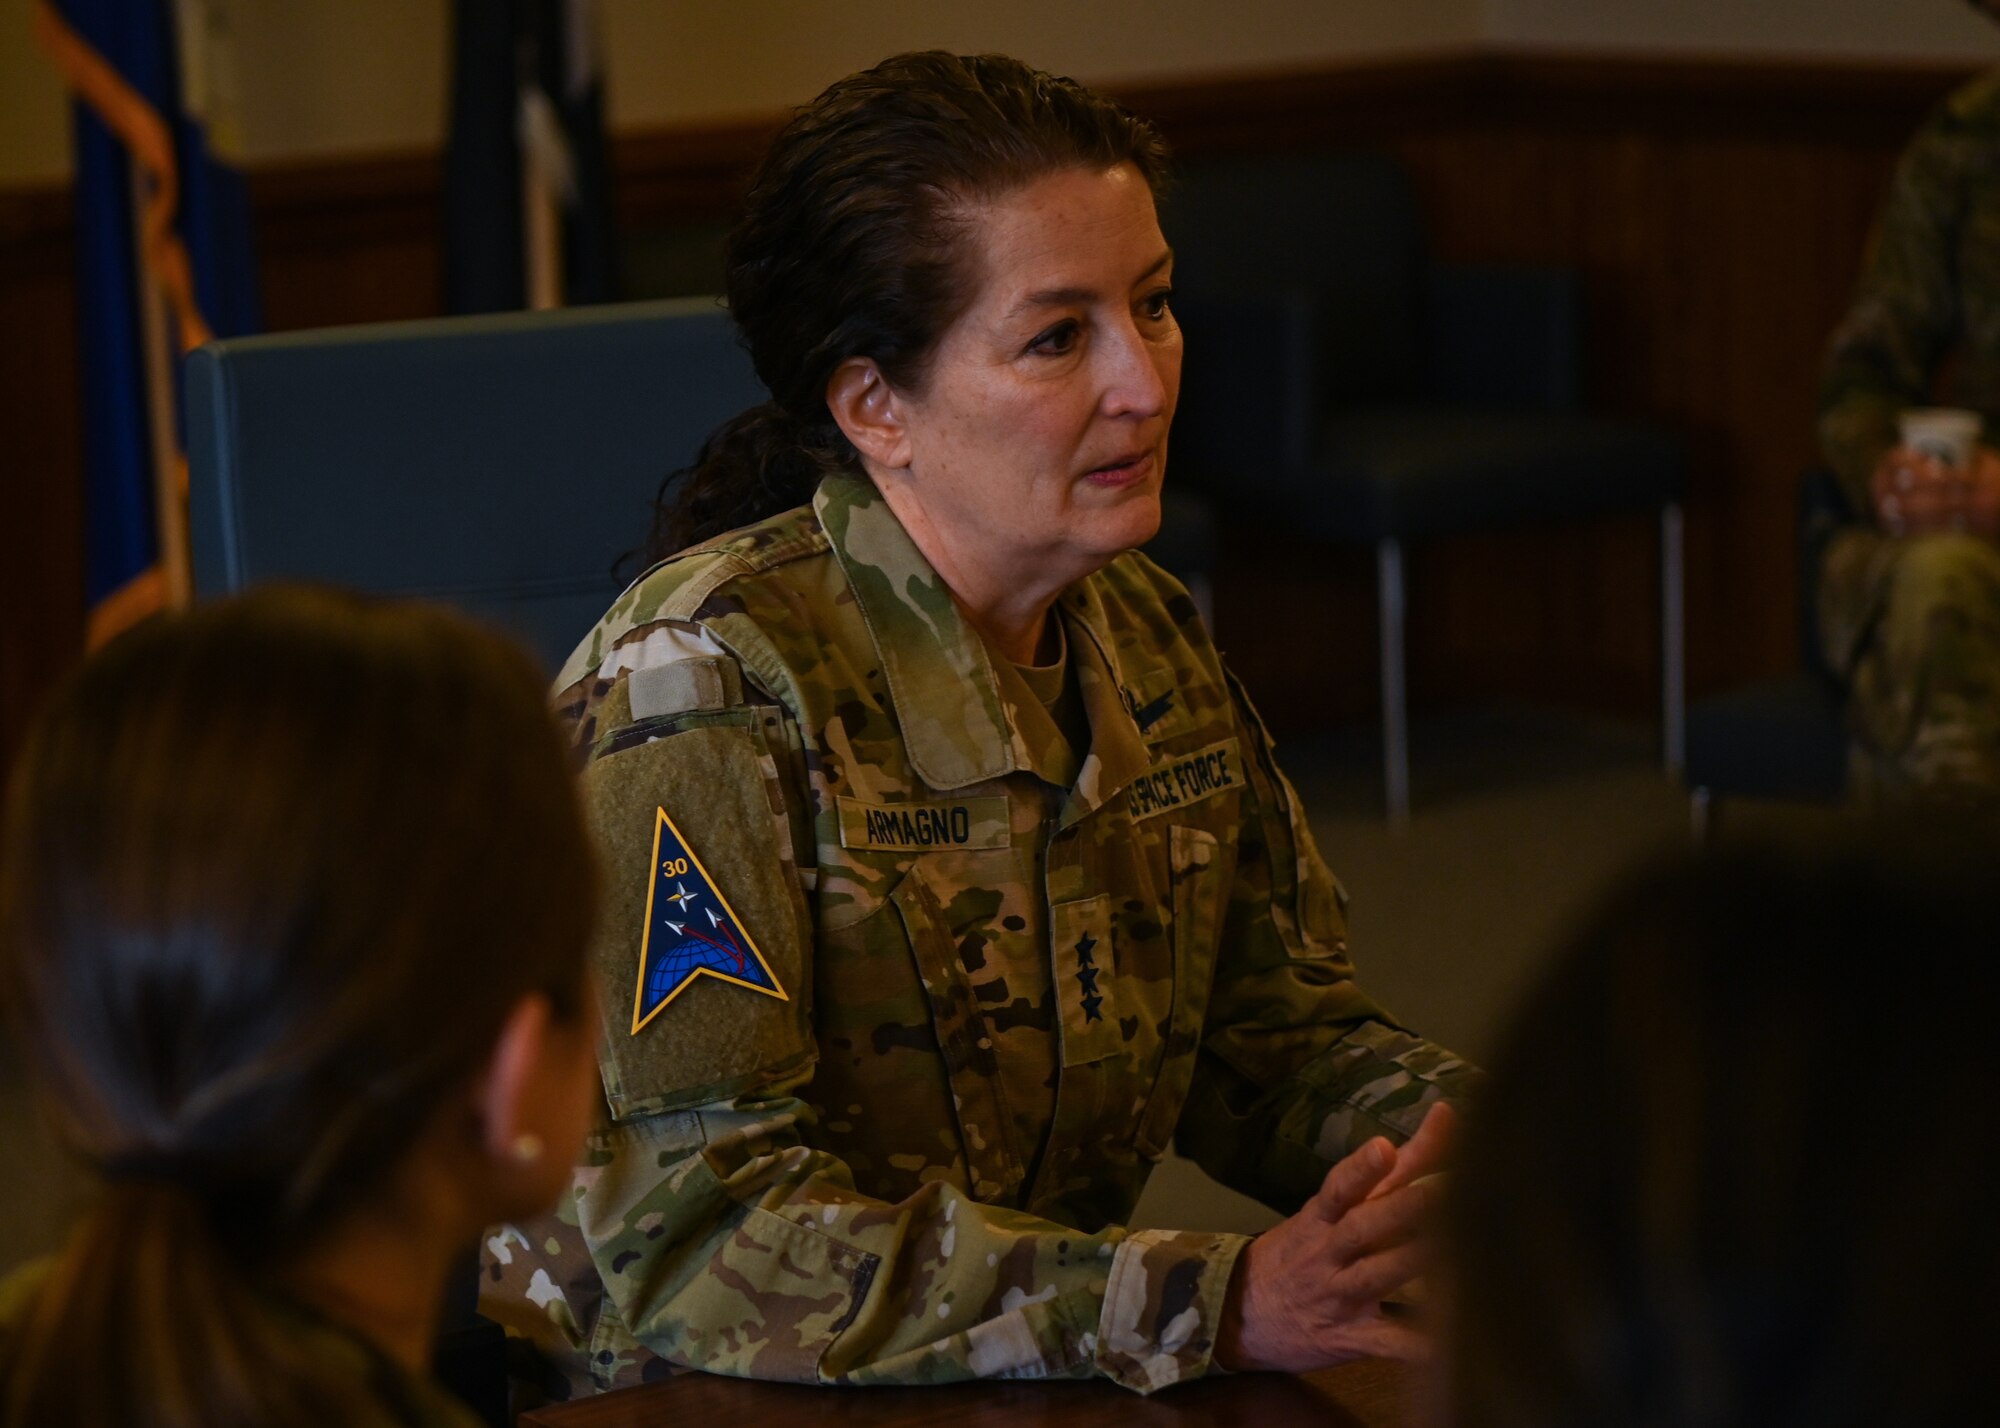 Lt. Gen. Nina Armagno, U.S. Space Force Headquarters director of staff, engages in conversation with company grade officers at Vandenberg Space Force Base, Calif., Feb. 23, 2023. Armagno has over 34 years of operational experience as a career space operator. (U.S. Space Force photo by Senior Airman Tiarra Sibley)